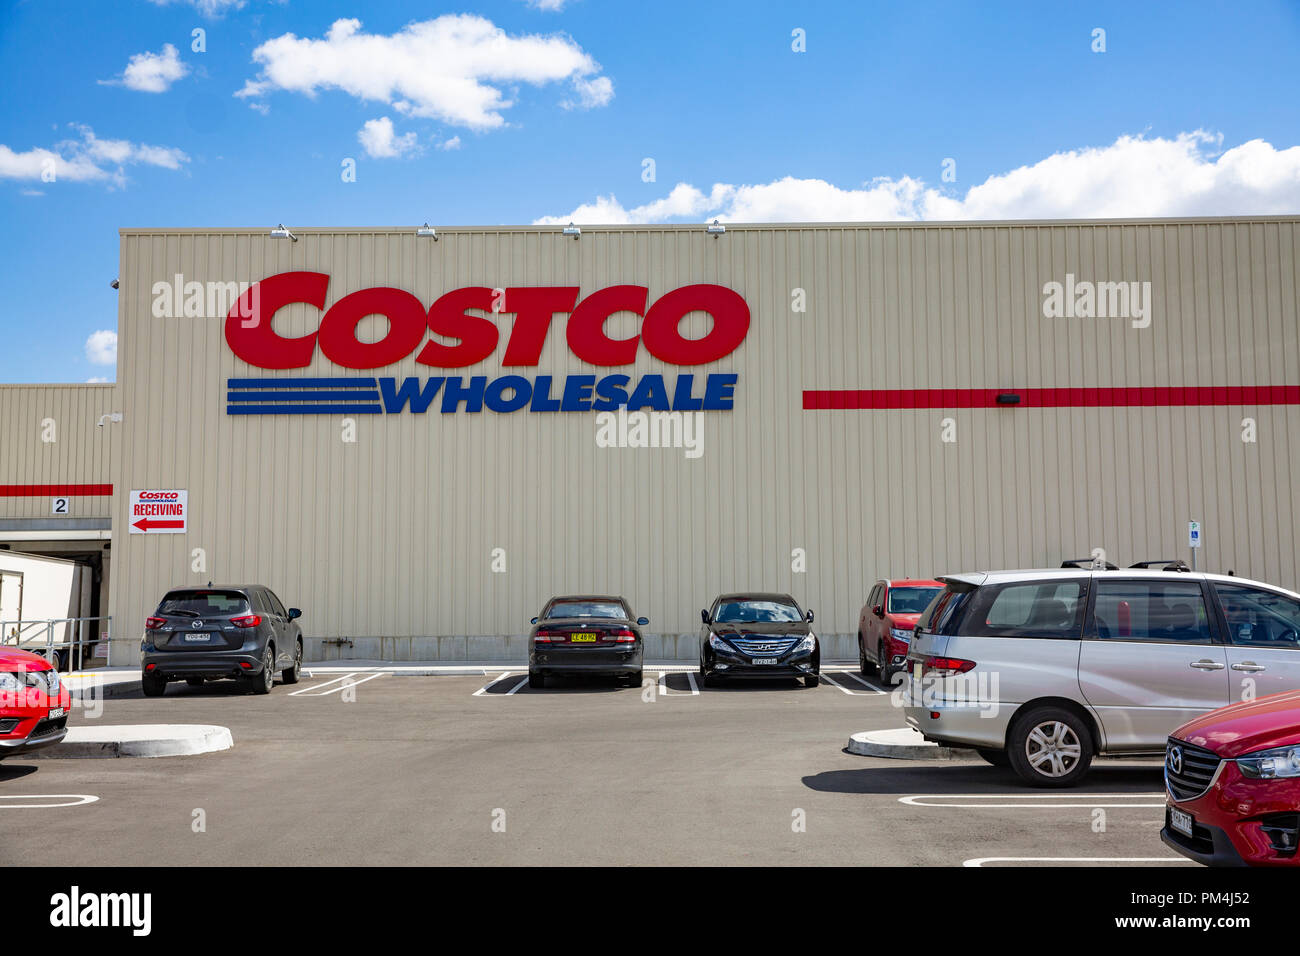 Costco wholesale shopping outlet in Marsden Park, North West Sydney,Australia Stock Photo